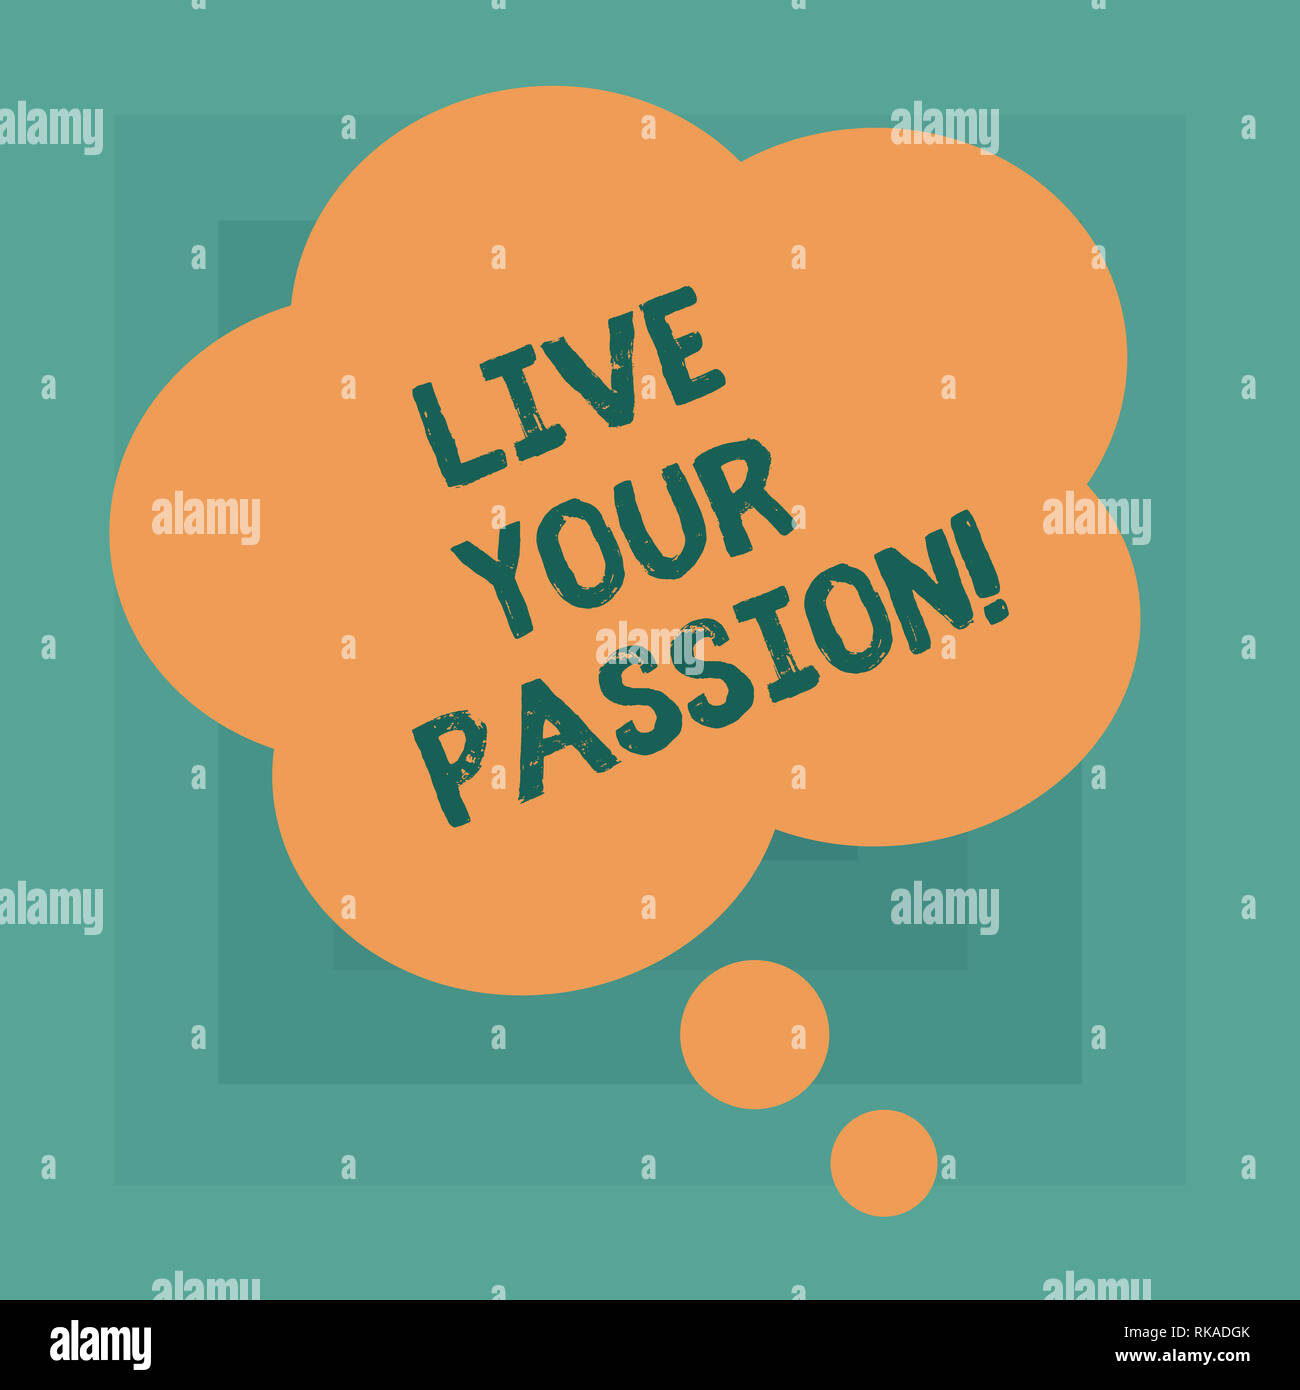 write about your passion